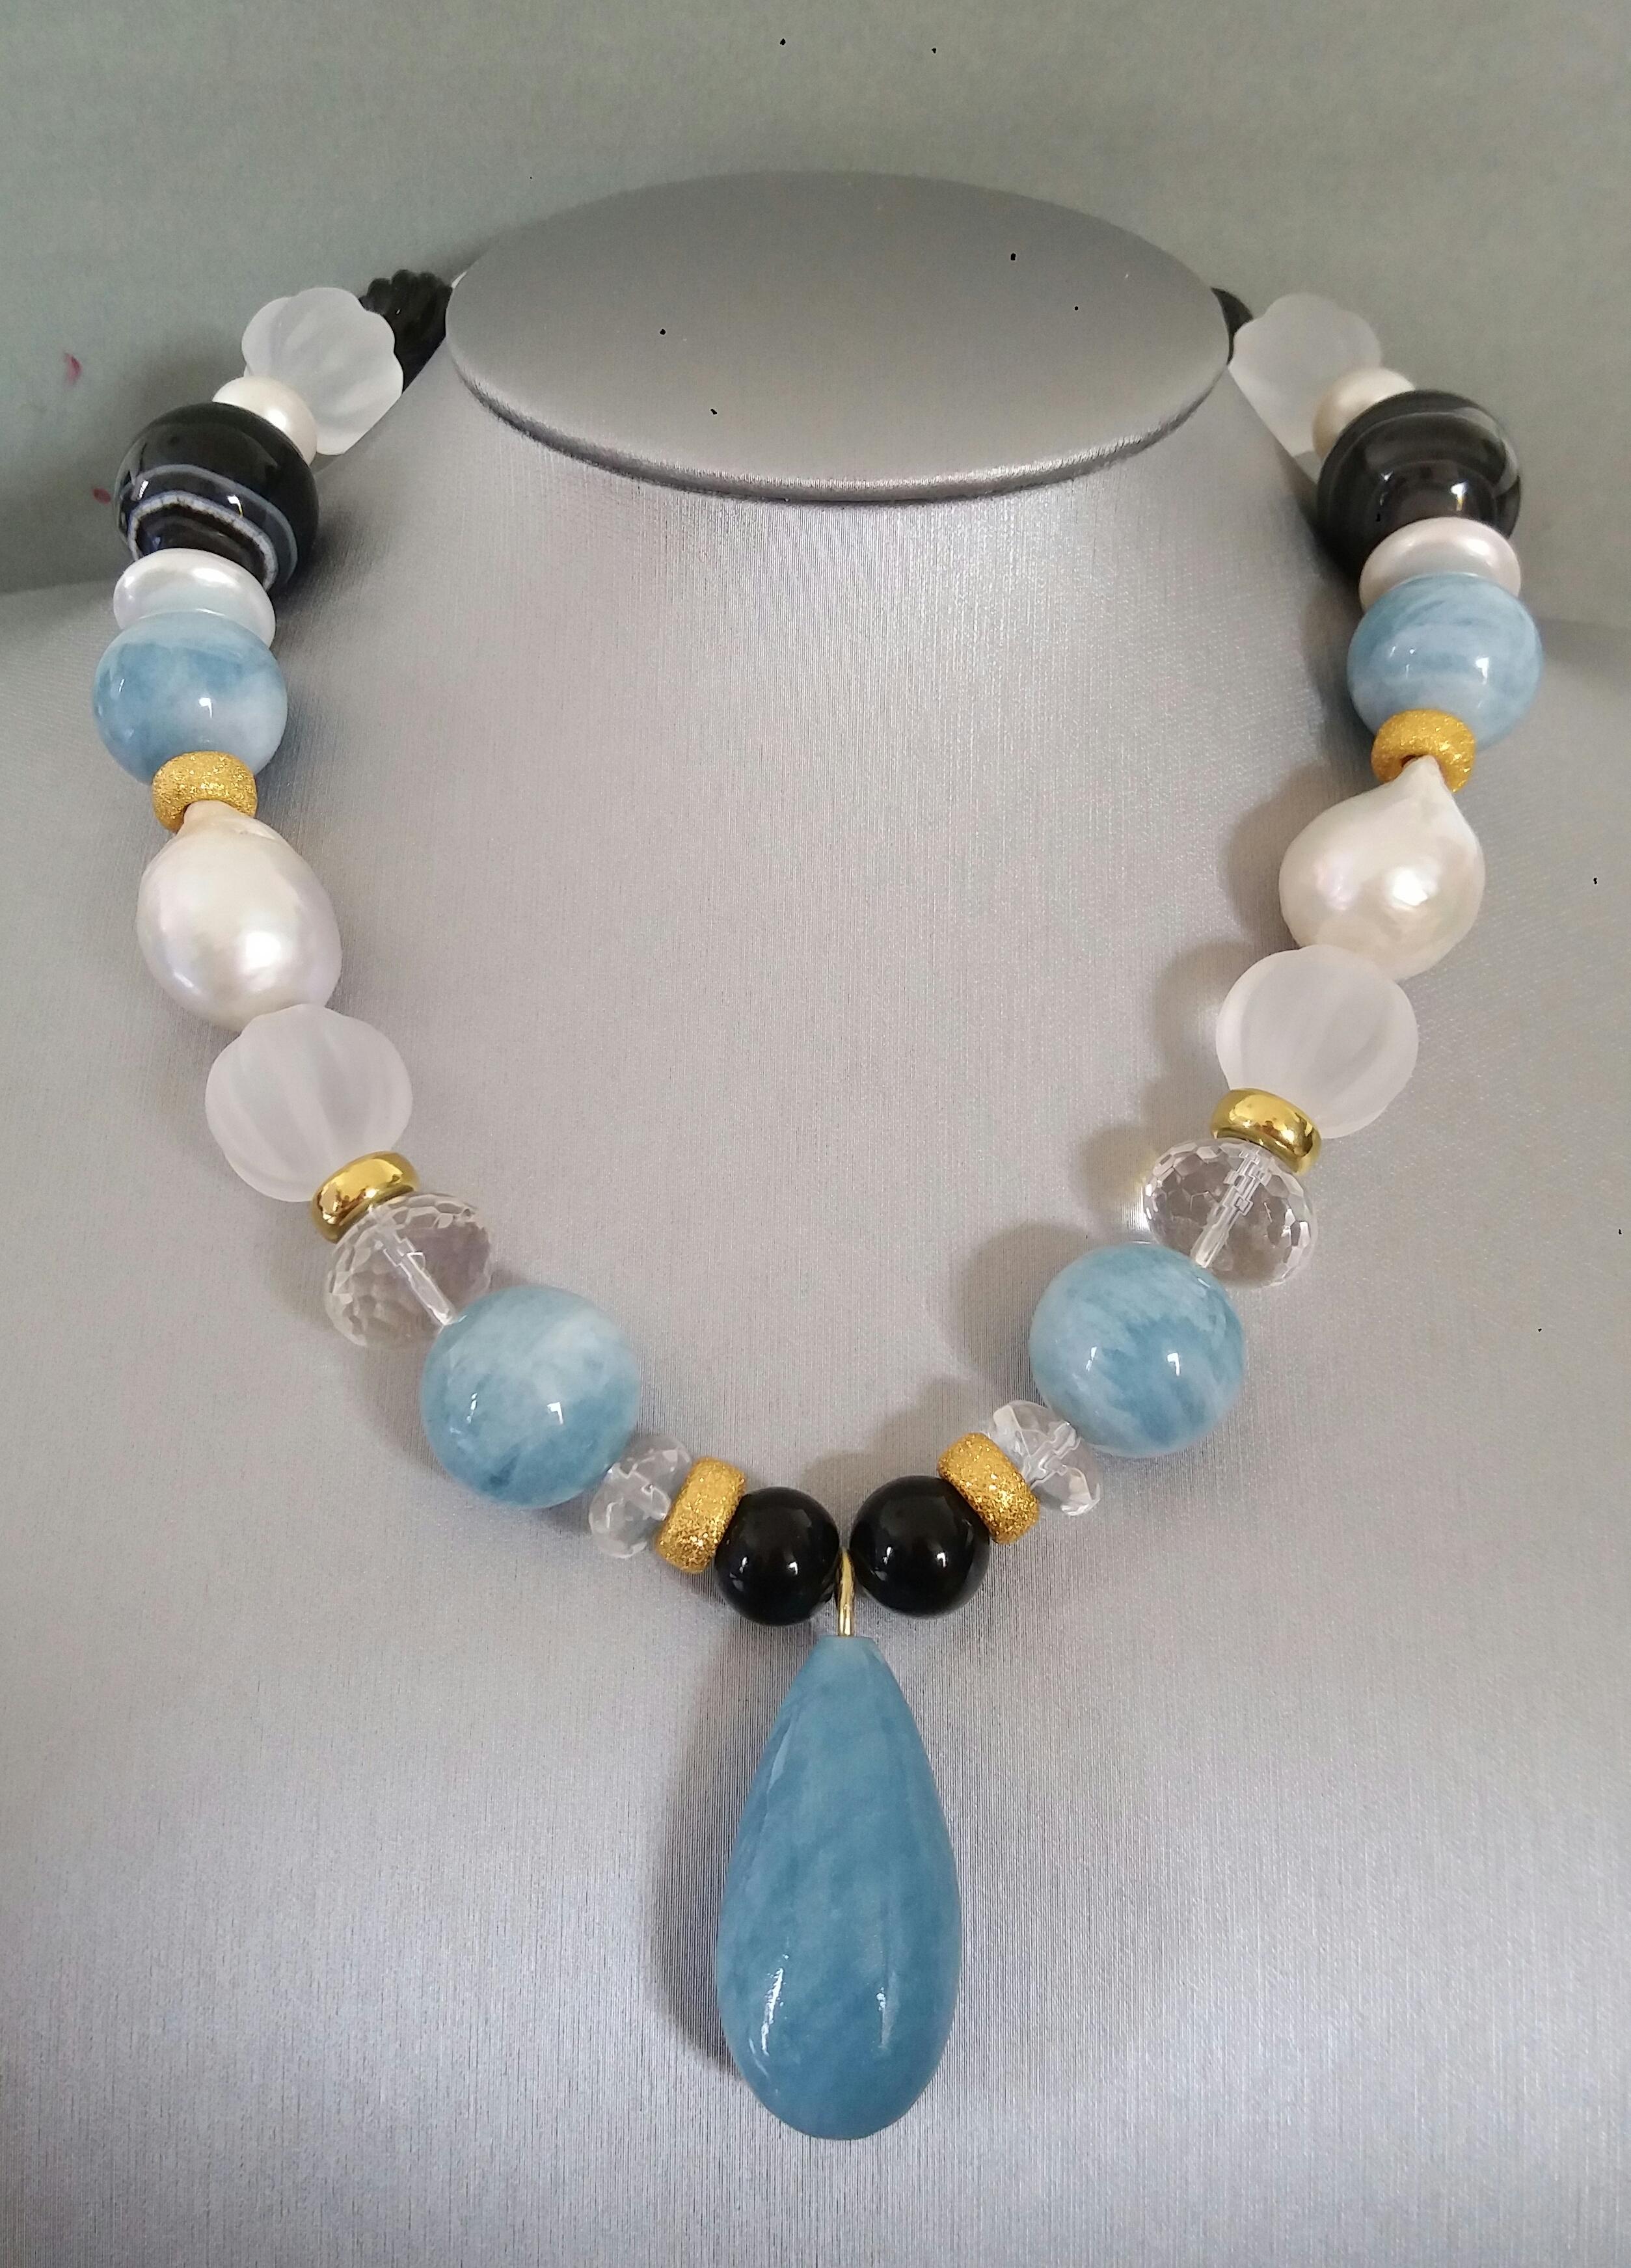 Aquamarine Beads And Pendant Baroque Pearls Quartz Onyx Yellow Gold Necklace For Sale 8